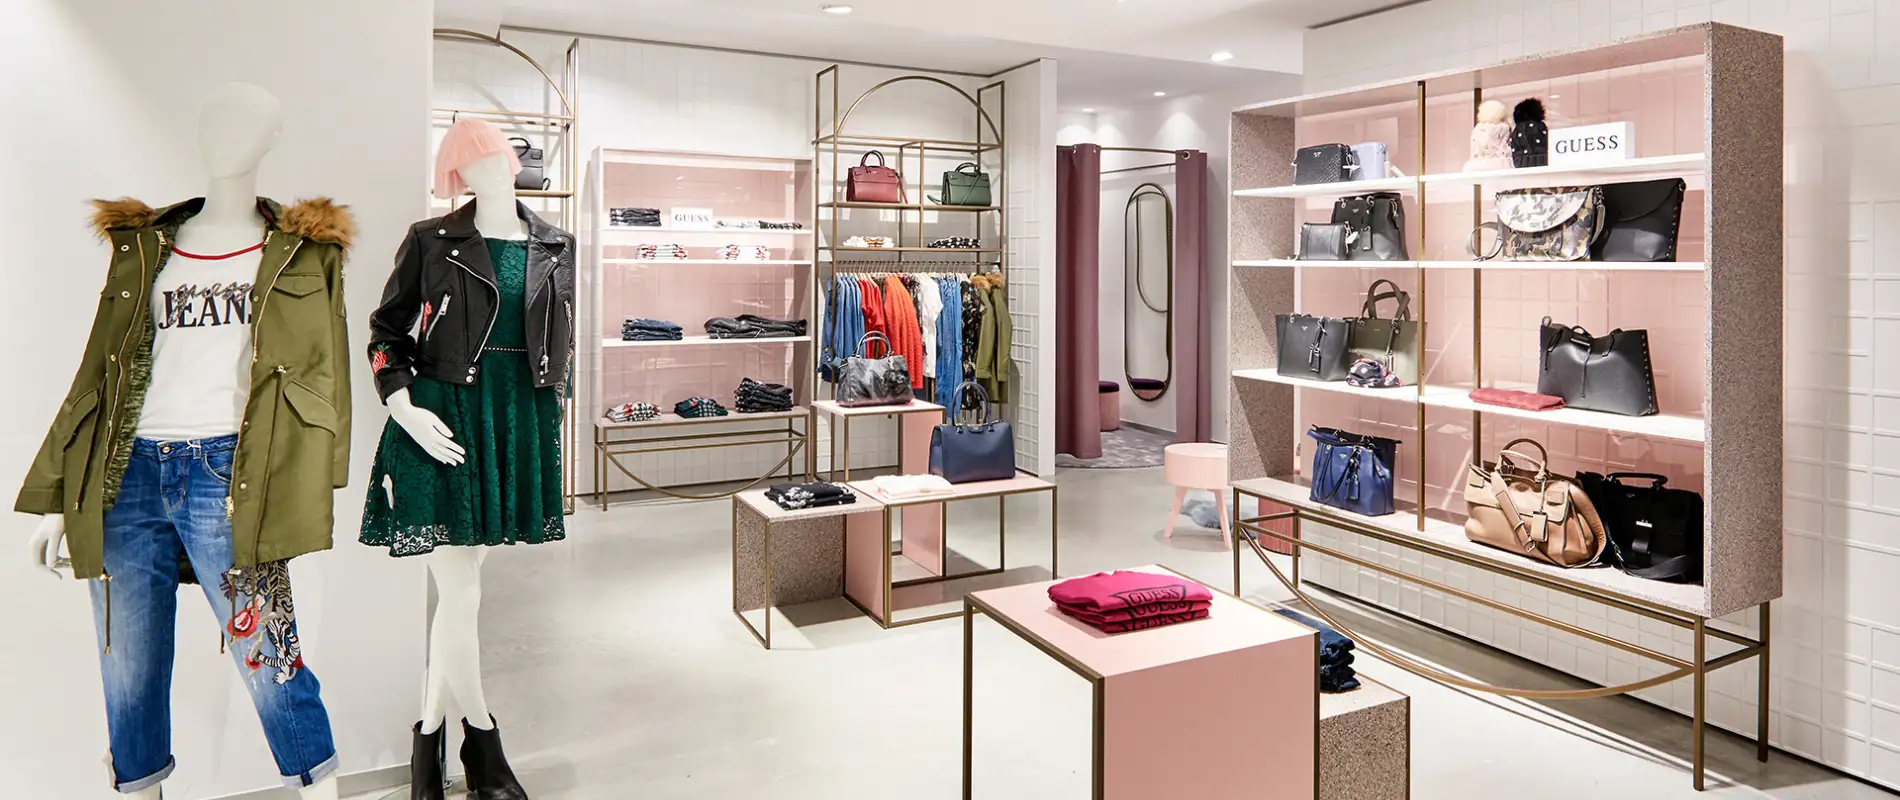 young womens fashion store - complete redesign - Kaiser Freiburg - interior architecture - store overview - pink arrangement boards